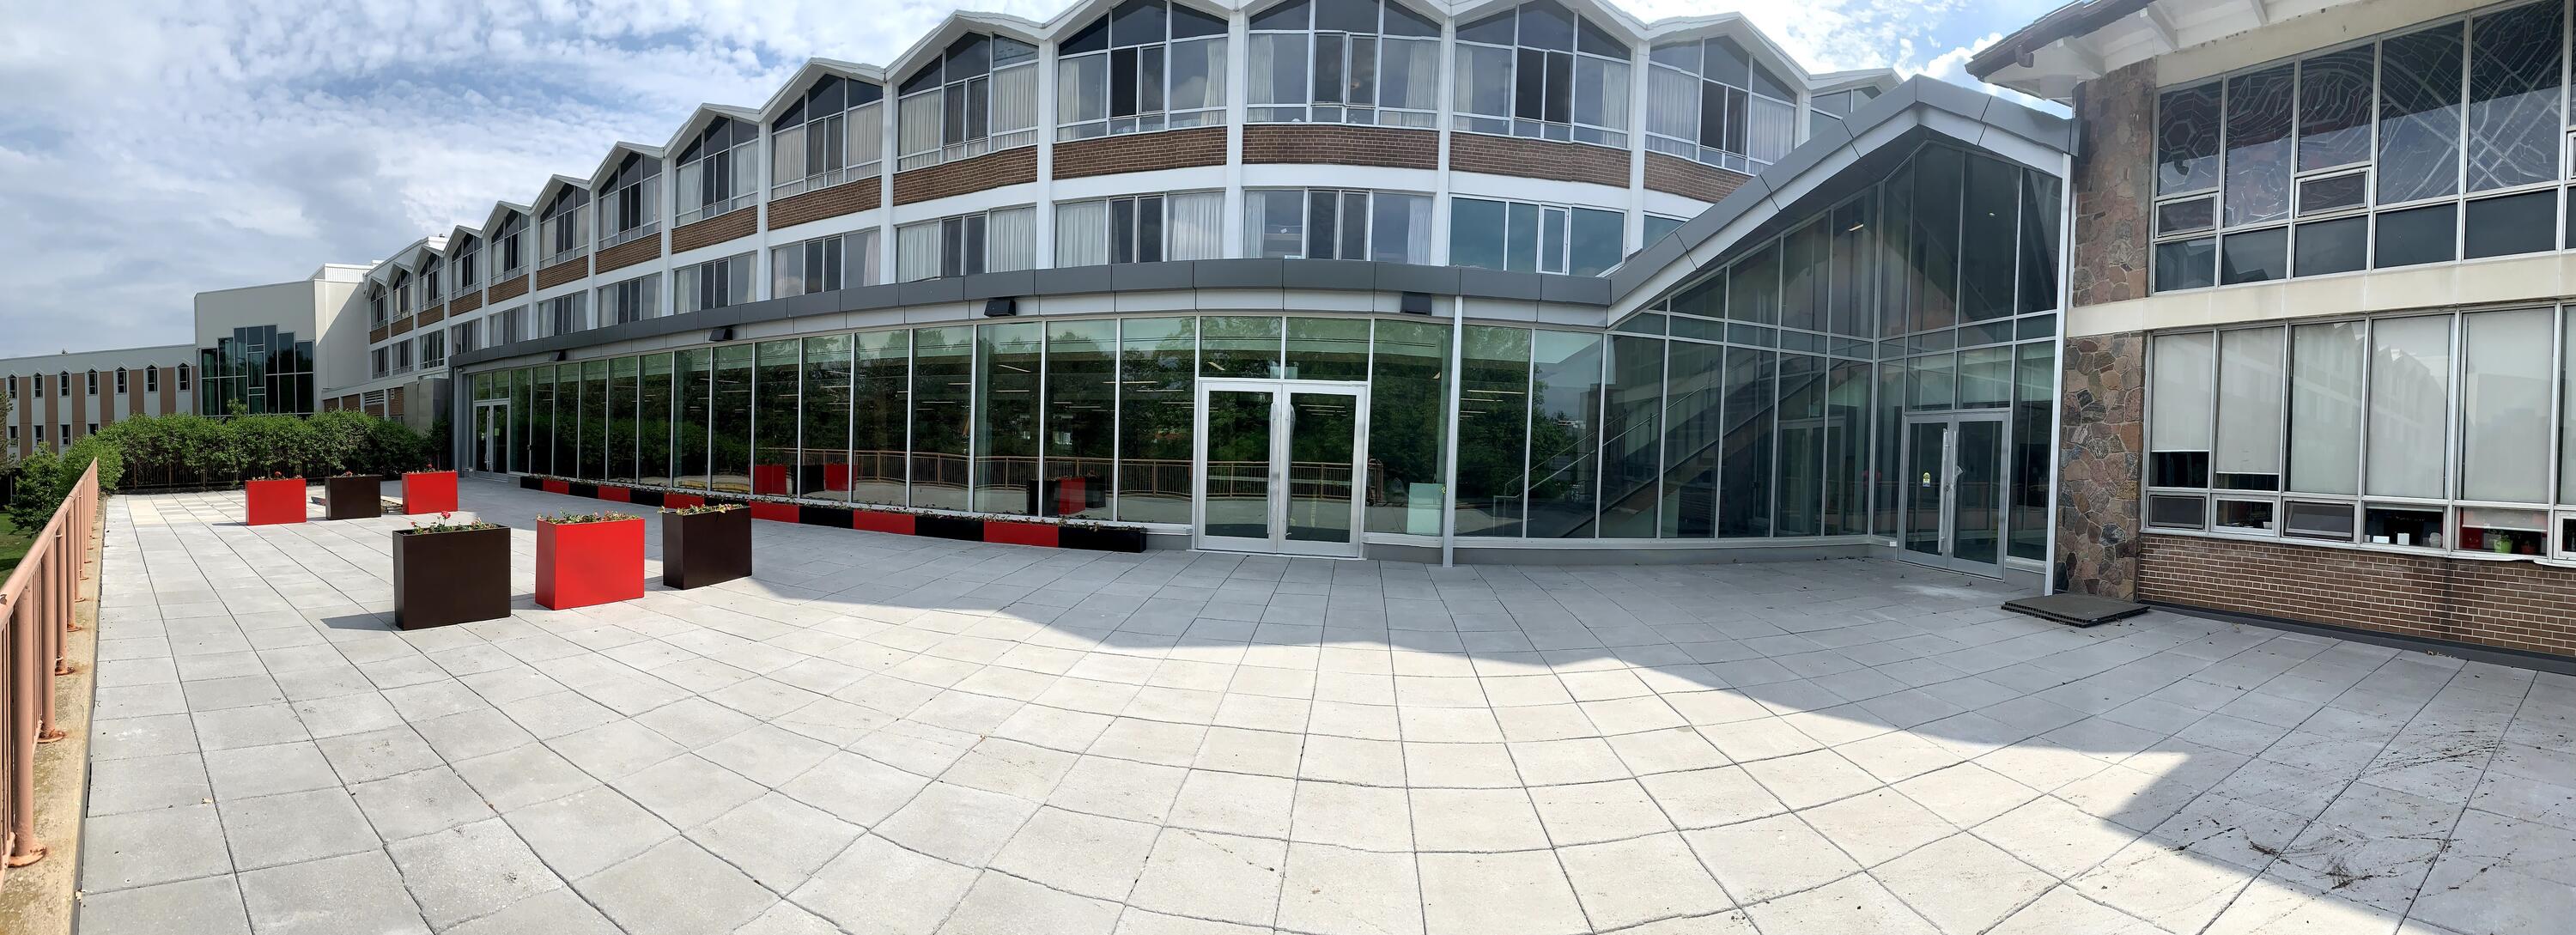 A panoramic view of the grebel patio and windows of the new dining room on a bright sunny day